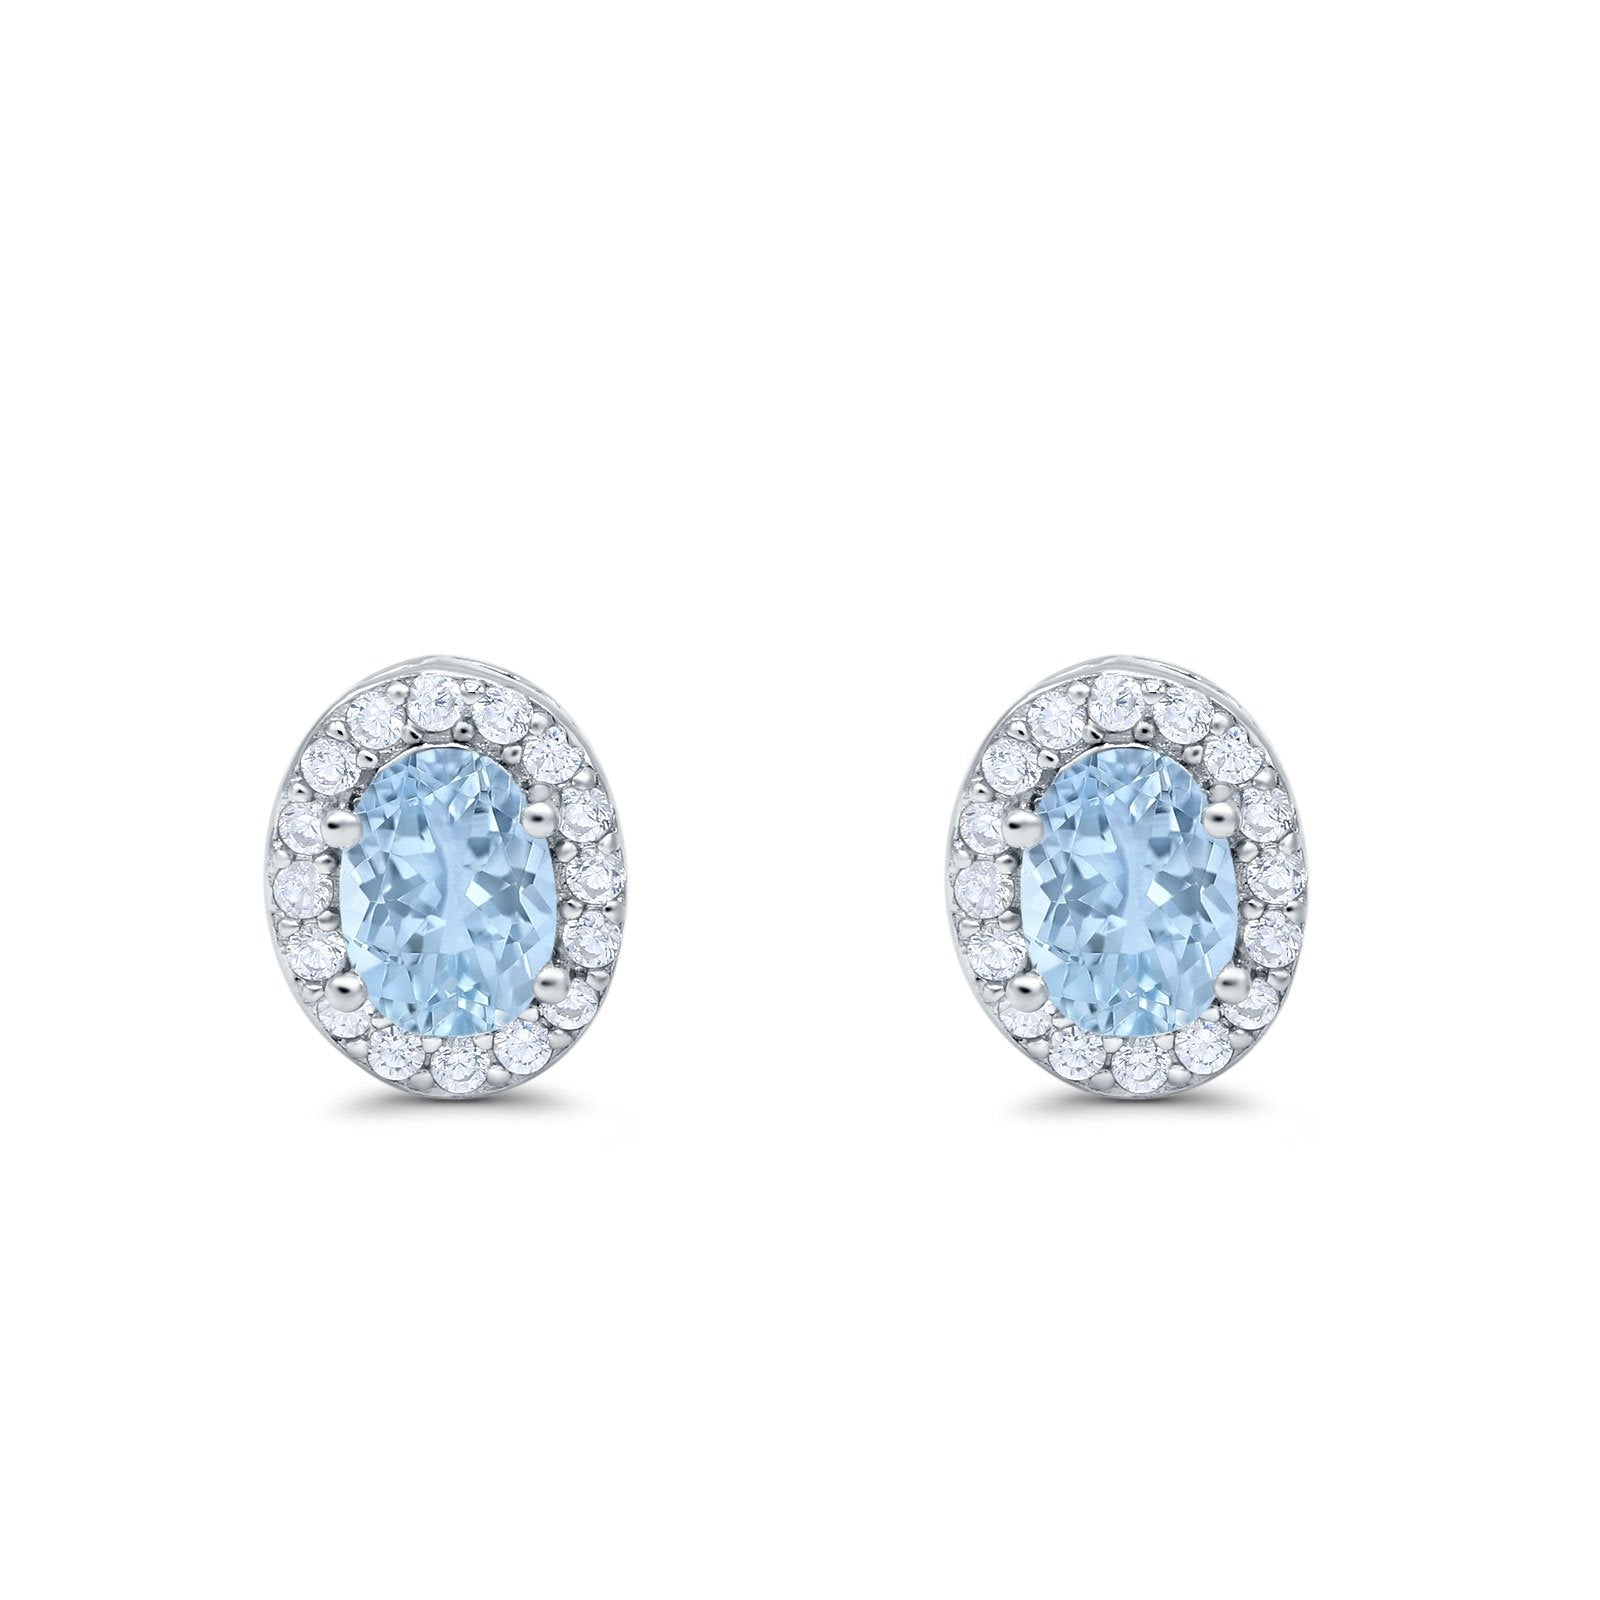 Stud Earrings Wedding Engagement Oval Simulated CZ 925 Sterling Silver (11mm)